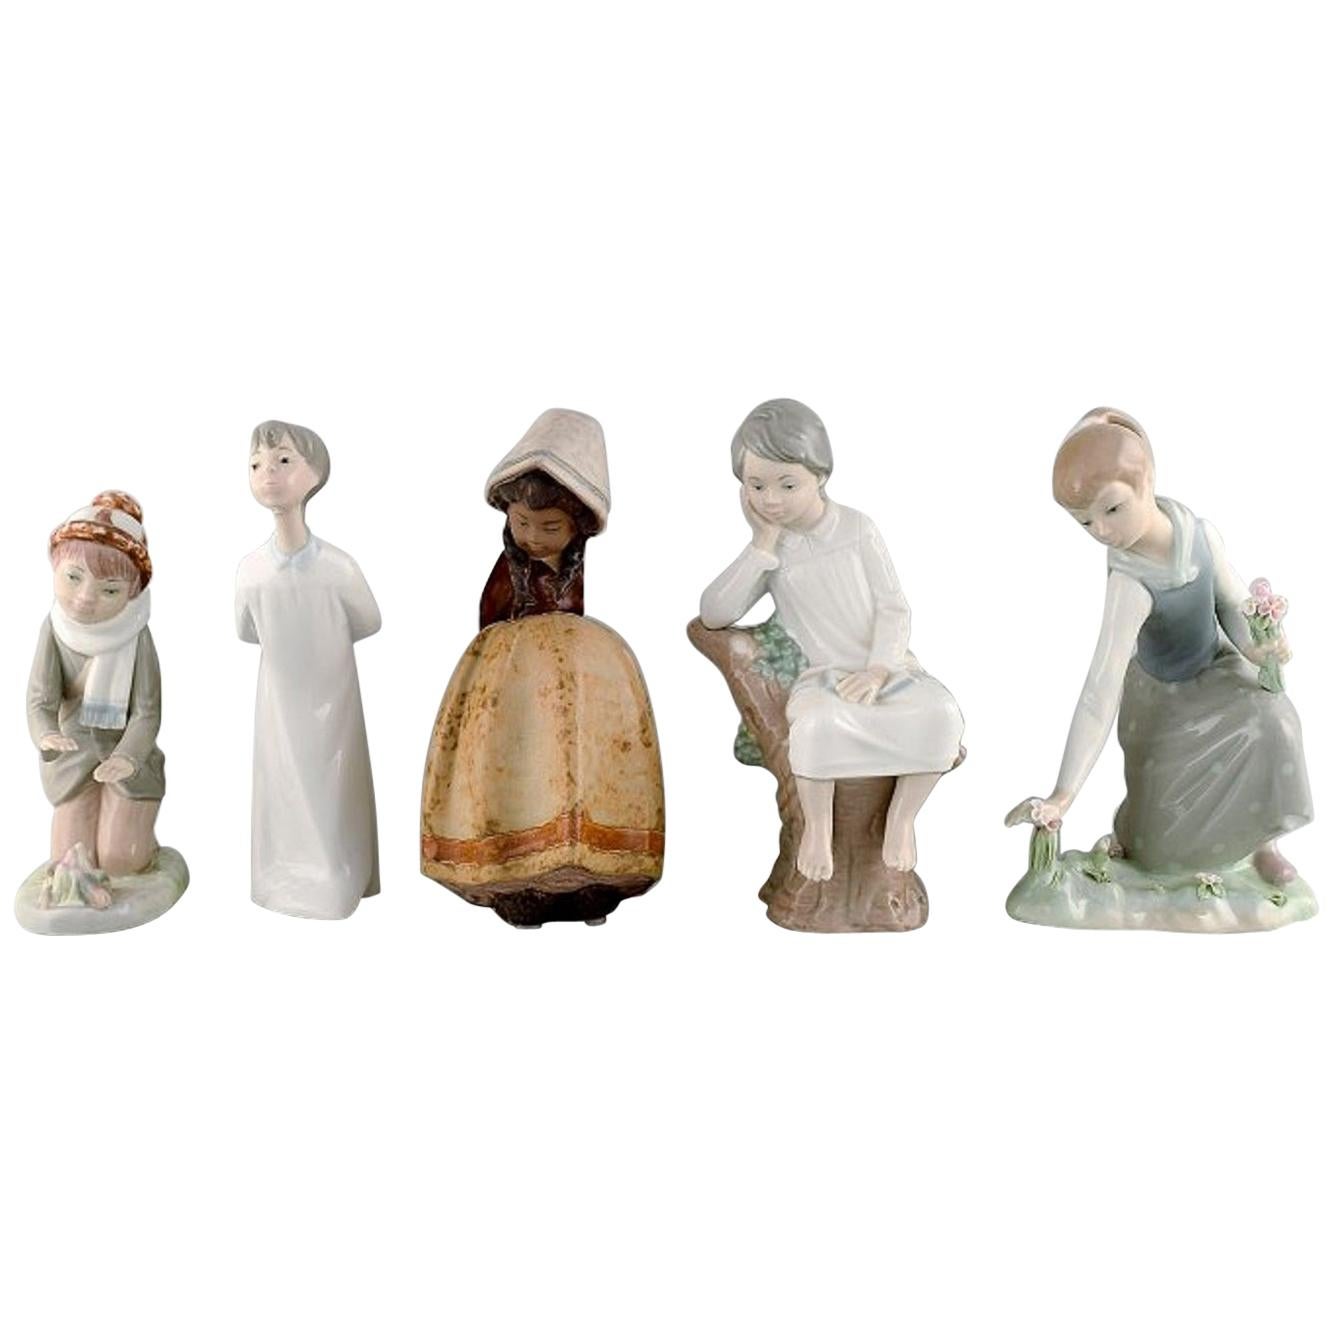 Lladro, Nao and Zaphir, Spain, Five Porcelain Figurines of Children, 1980s-1990s